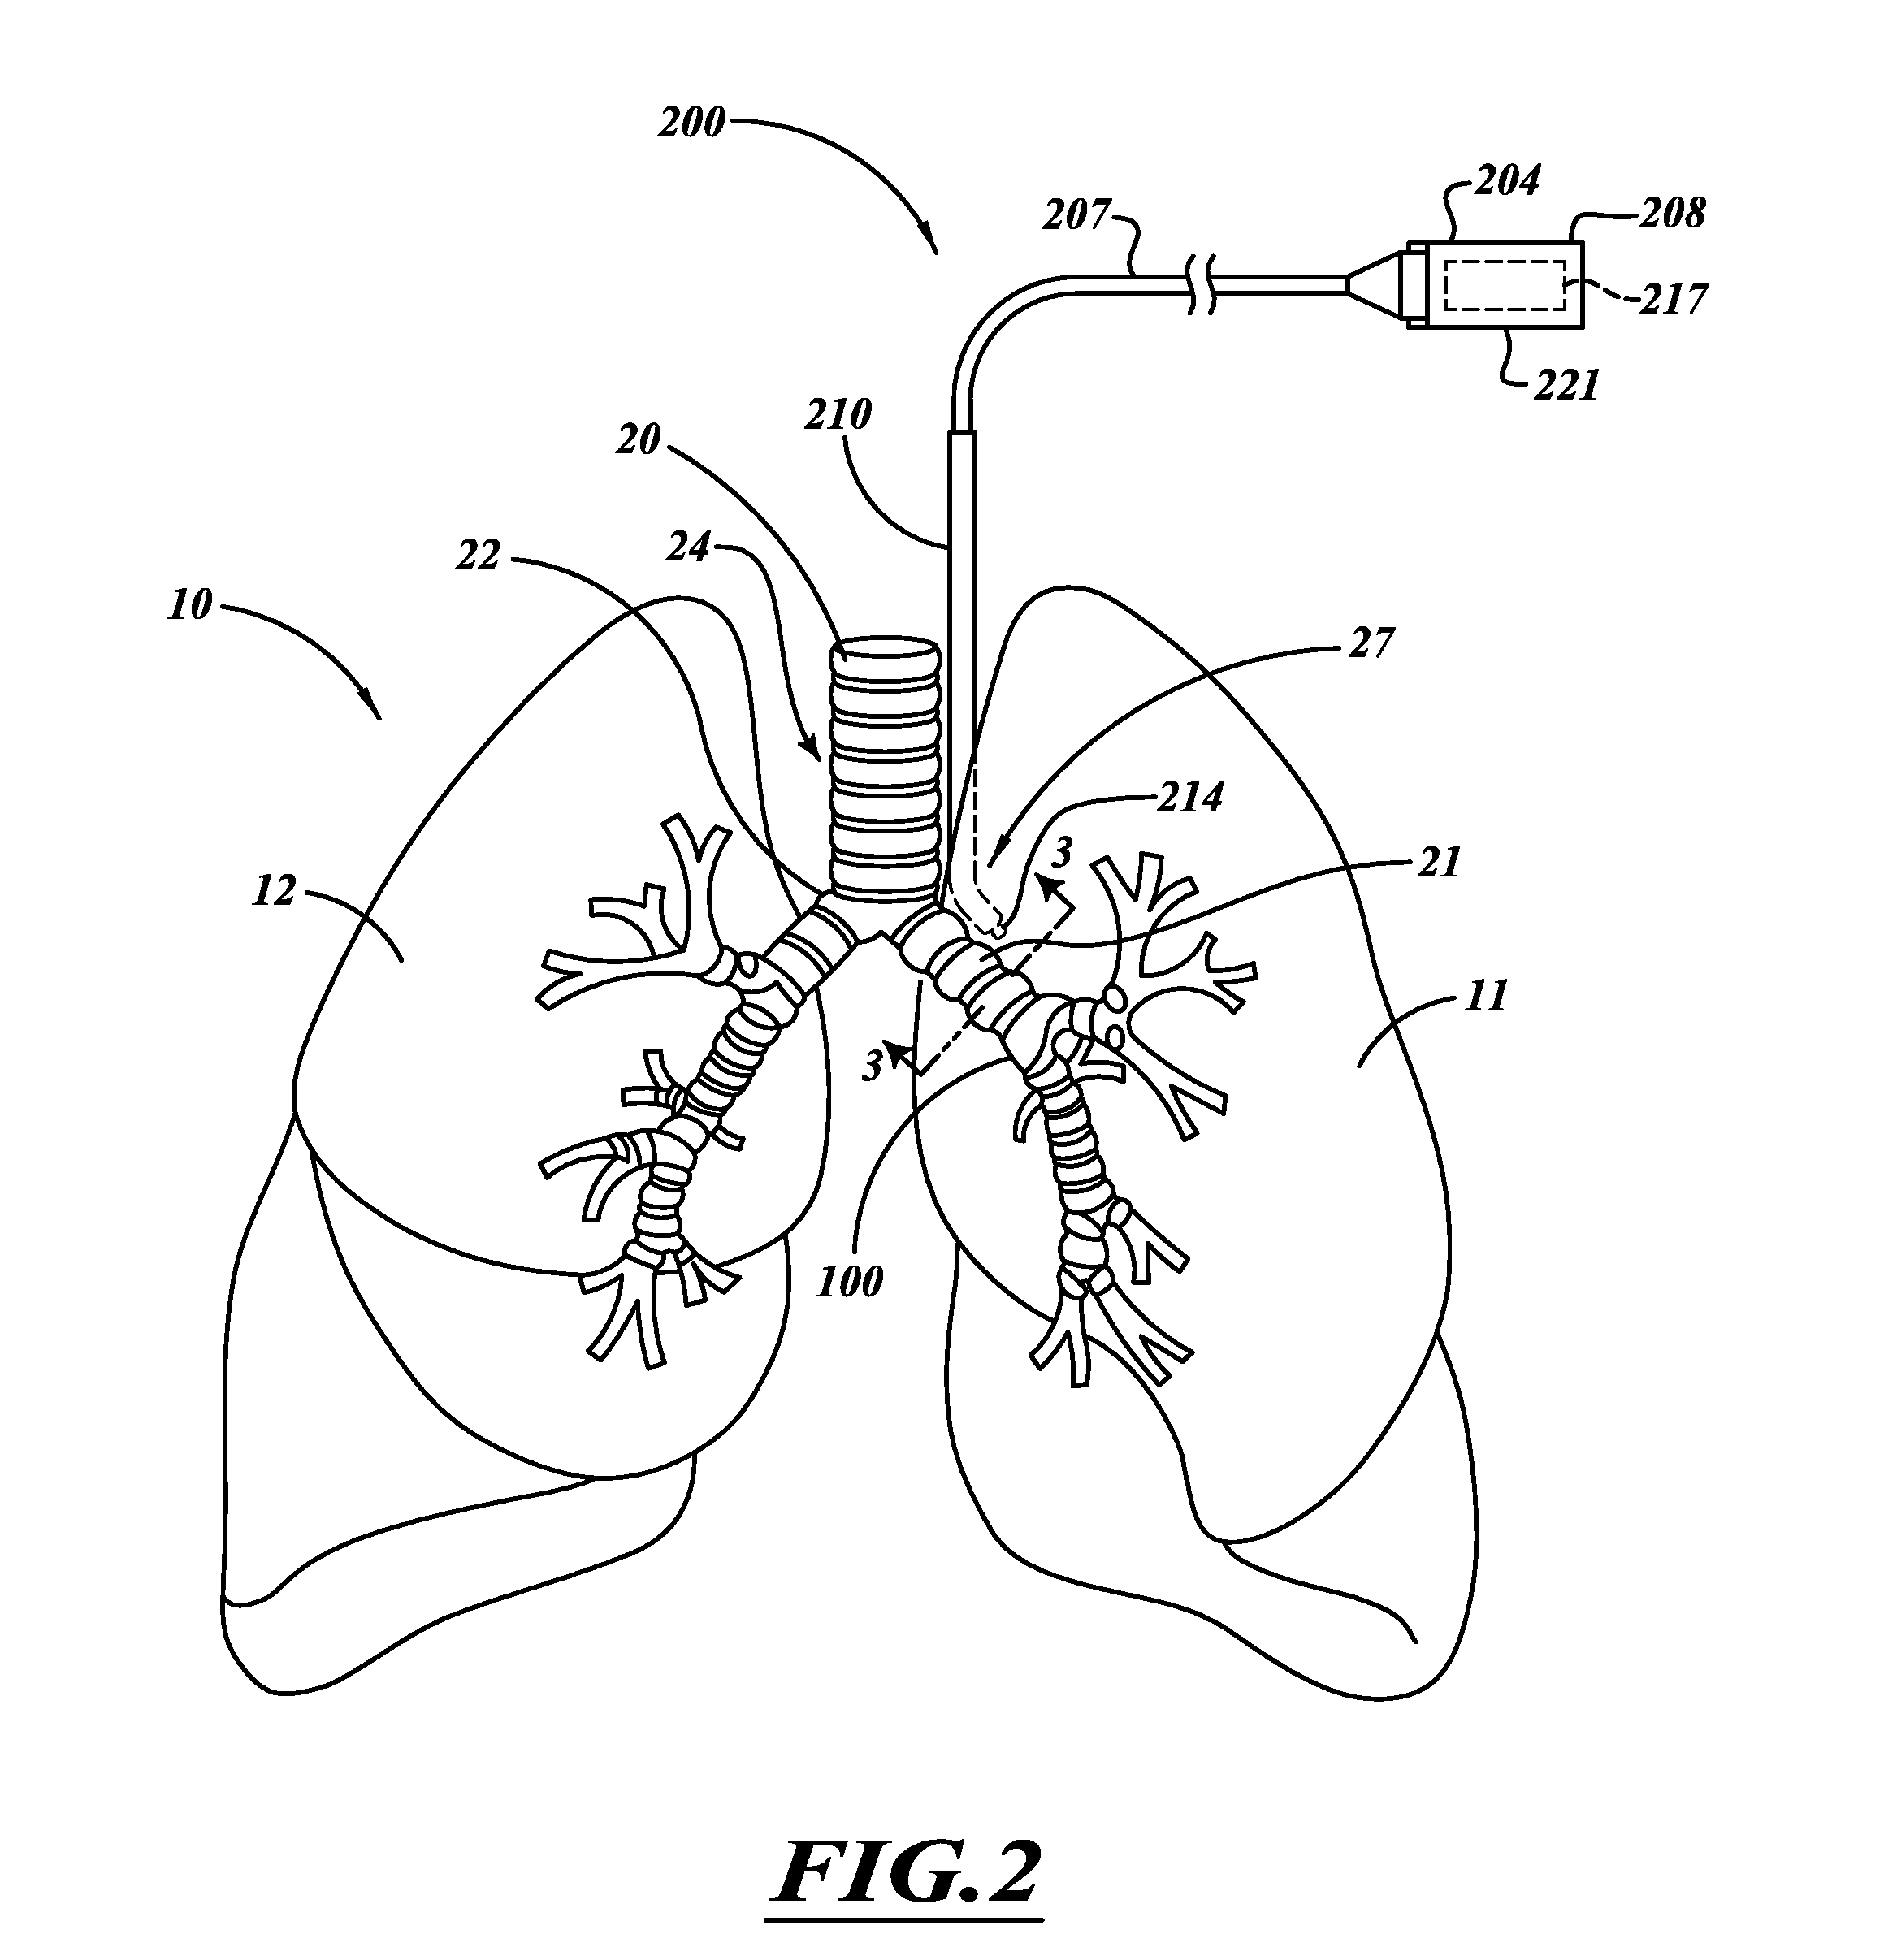 Non-invasive and minimally invasive denervation methods and systems for performing the same